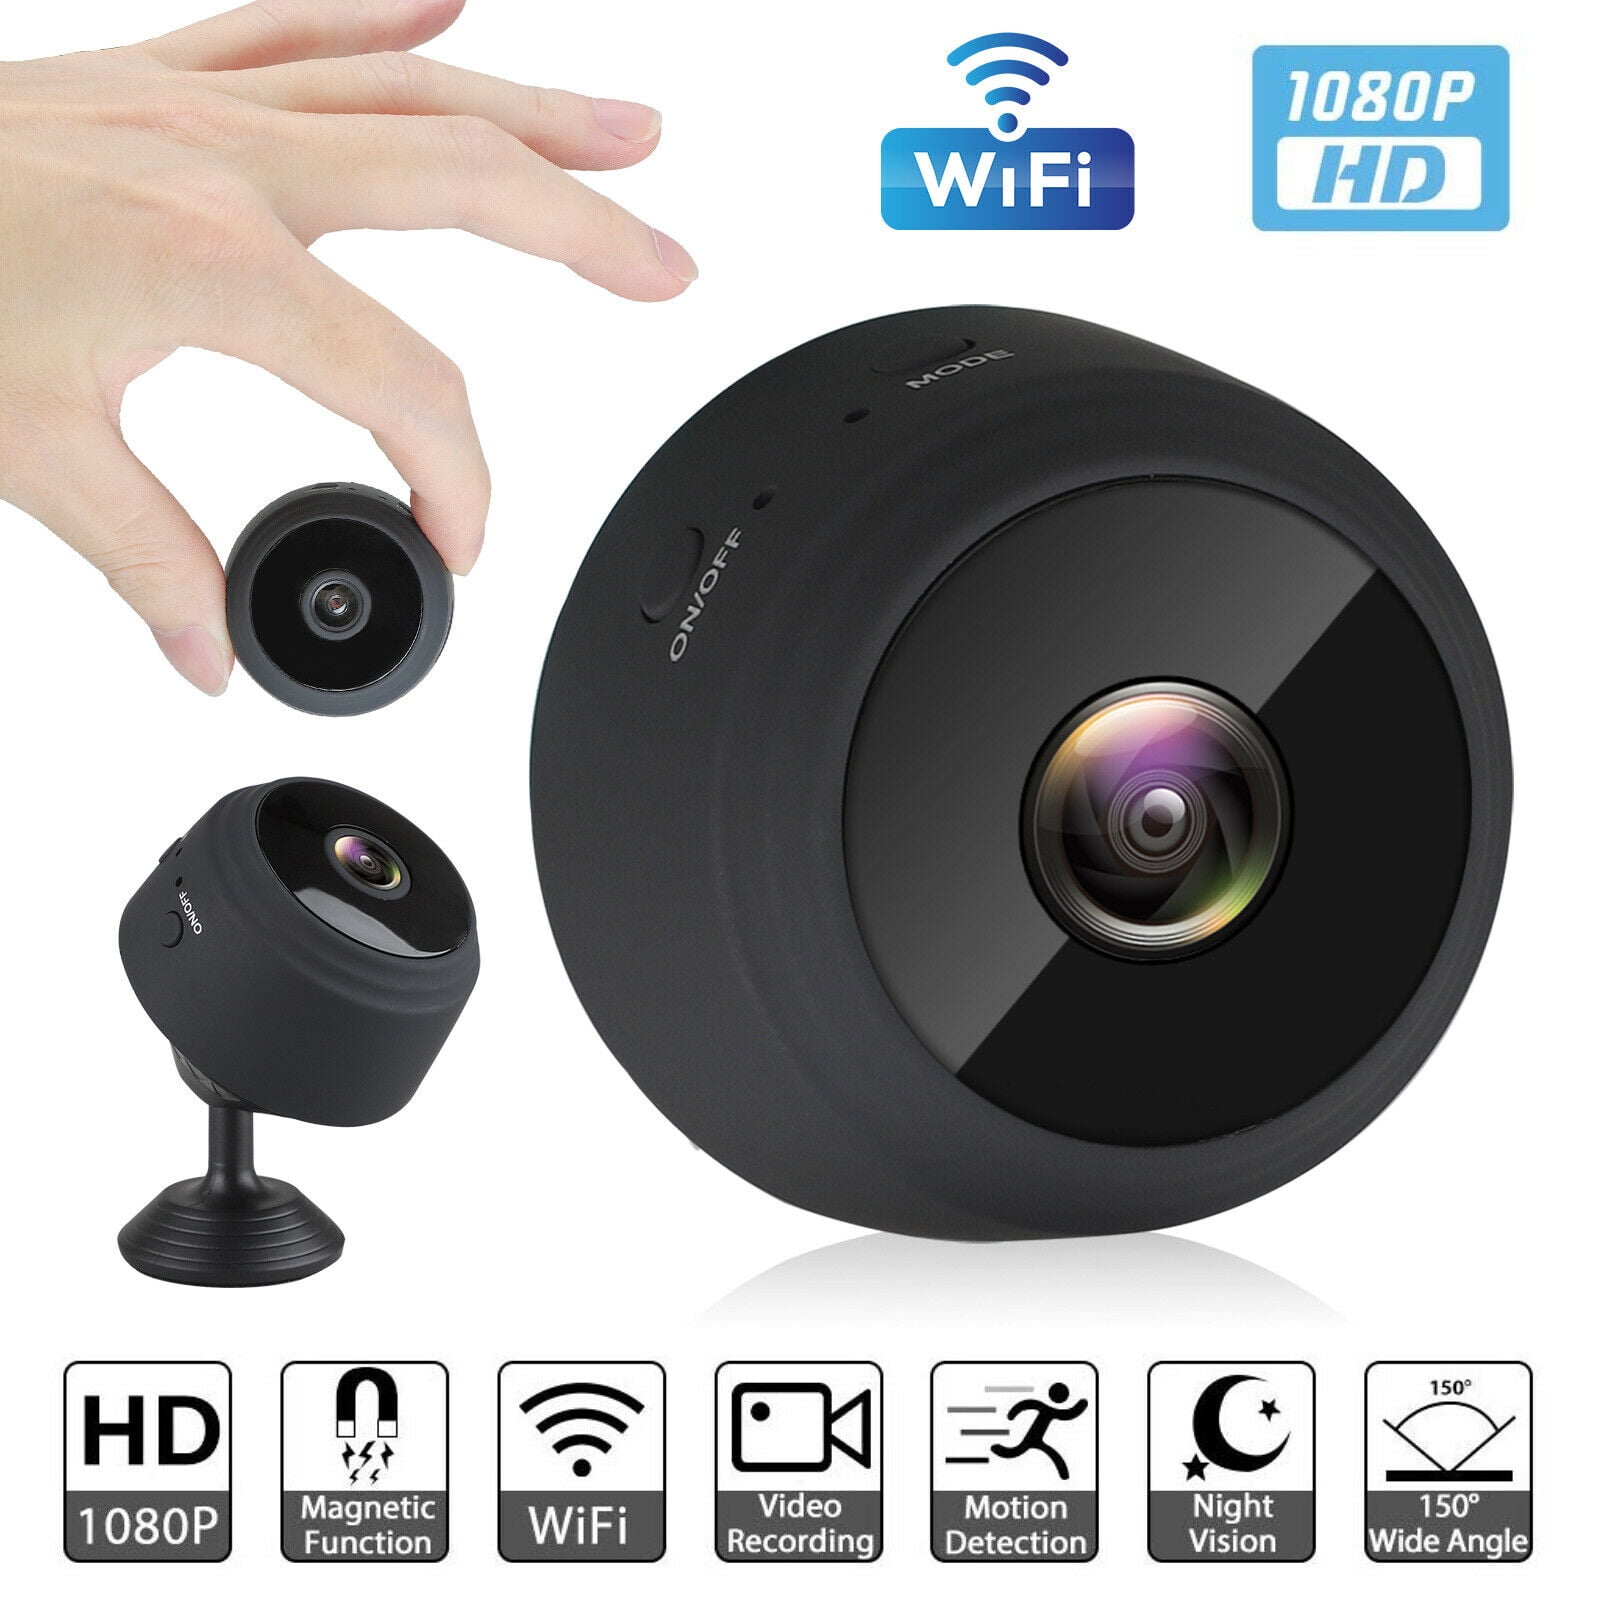 HD 1080P Mini Camera Wireless Wifi IP Home Baby Security Cam DVR Night Vision US 